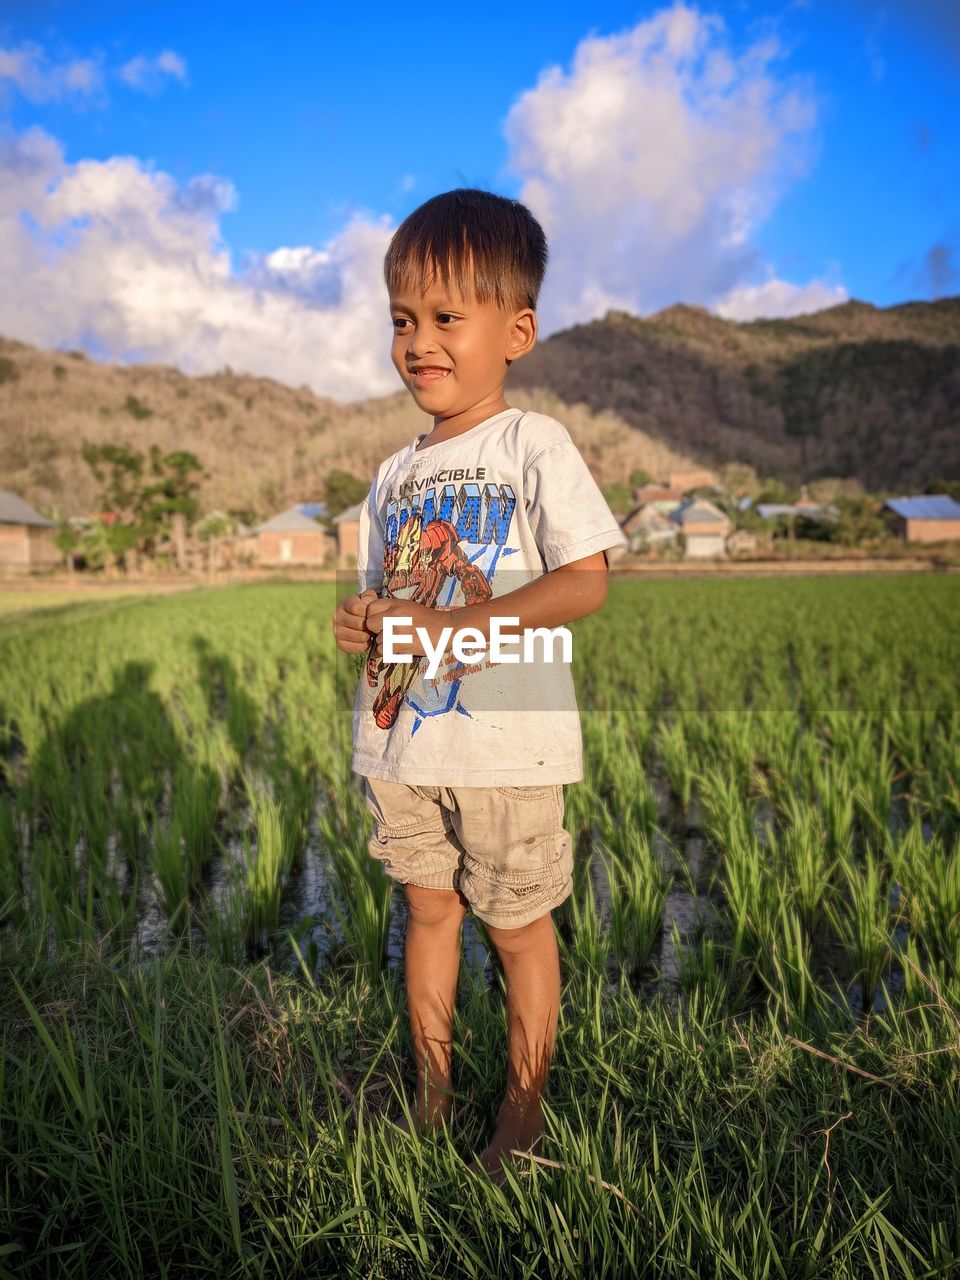 childhood, child, one person, grass, men, nature, field, plant, land, sky, landscape, meadow, standing, full length, casual clothing, toddler, smiling, portrait, cute, agriculture, grassland, emotion, cloud, front view, happiness, day, rural scene, person, vacation, leisure activity, outdoors, environment, innocence, natural environment, looking at camera, mountain, rural area, growth, shorts, summer, beauty in nature, lifestyles, blue